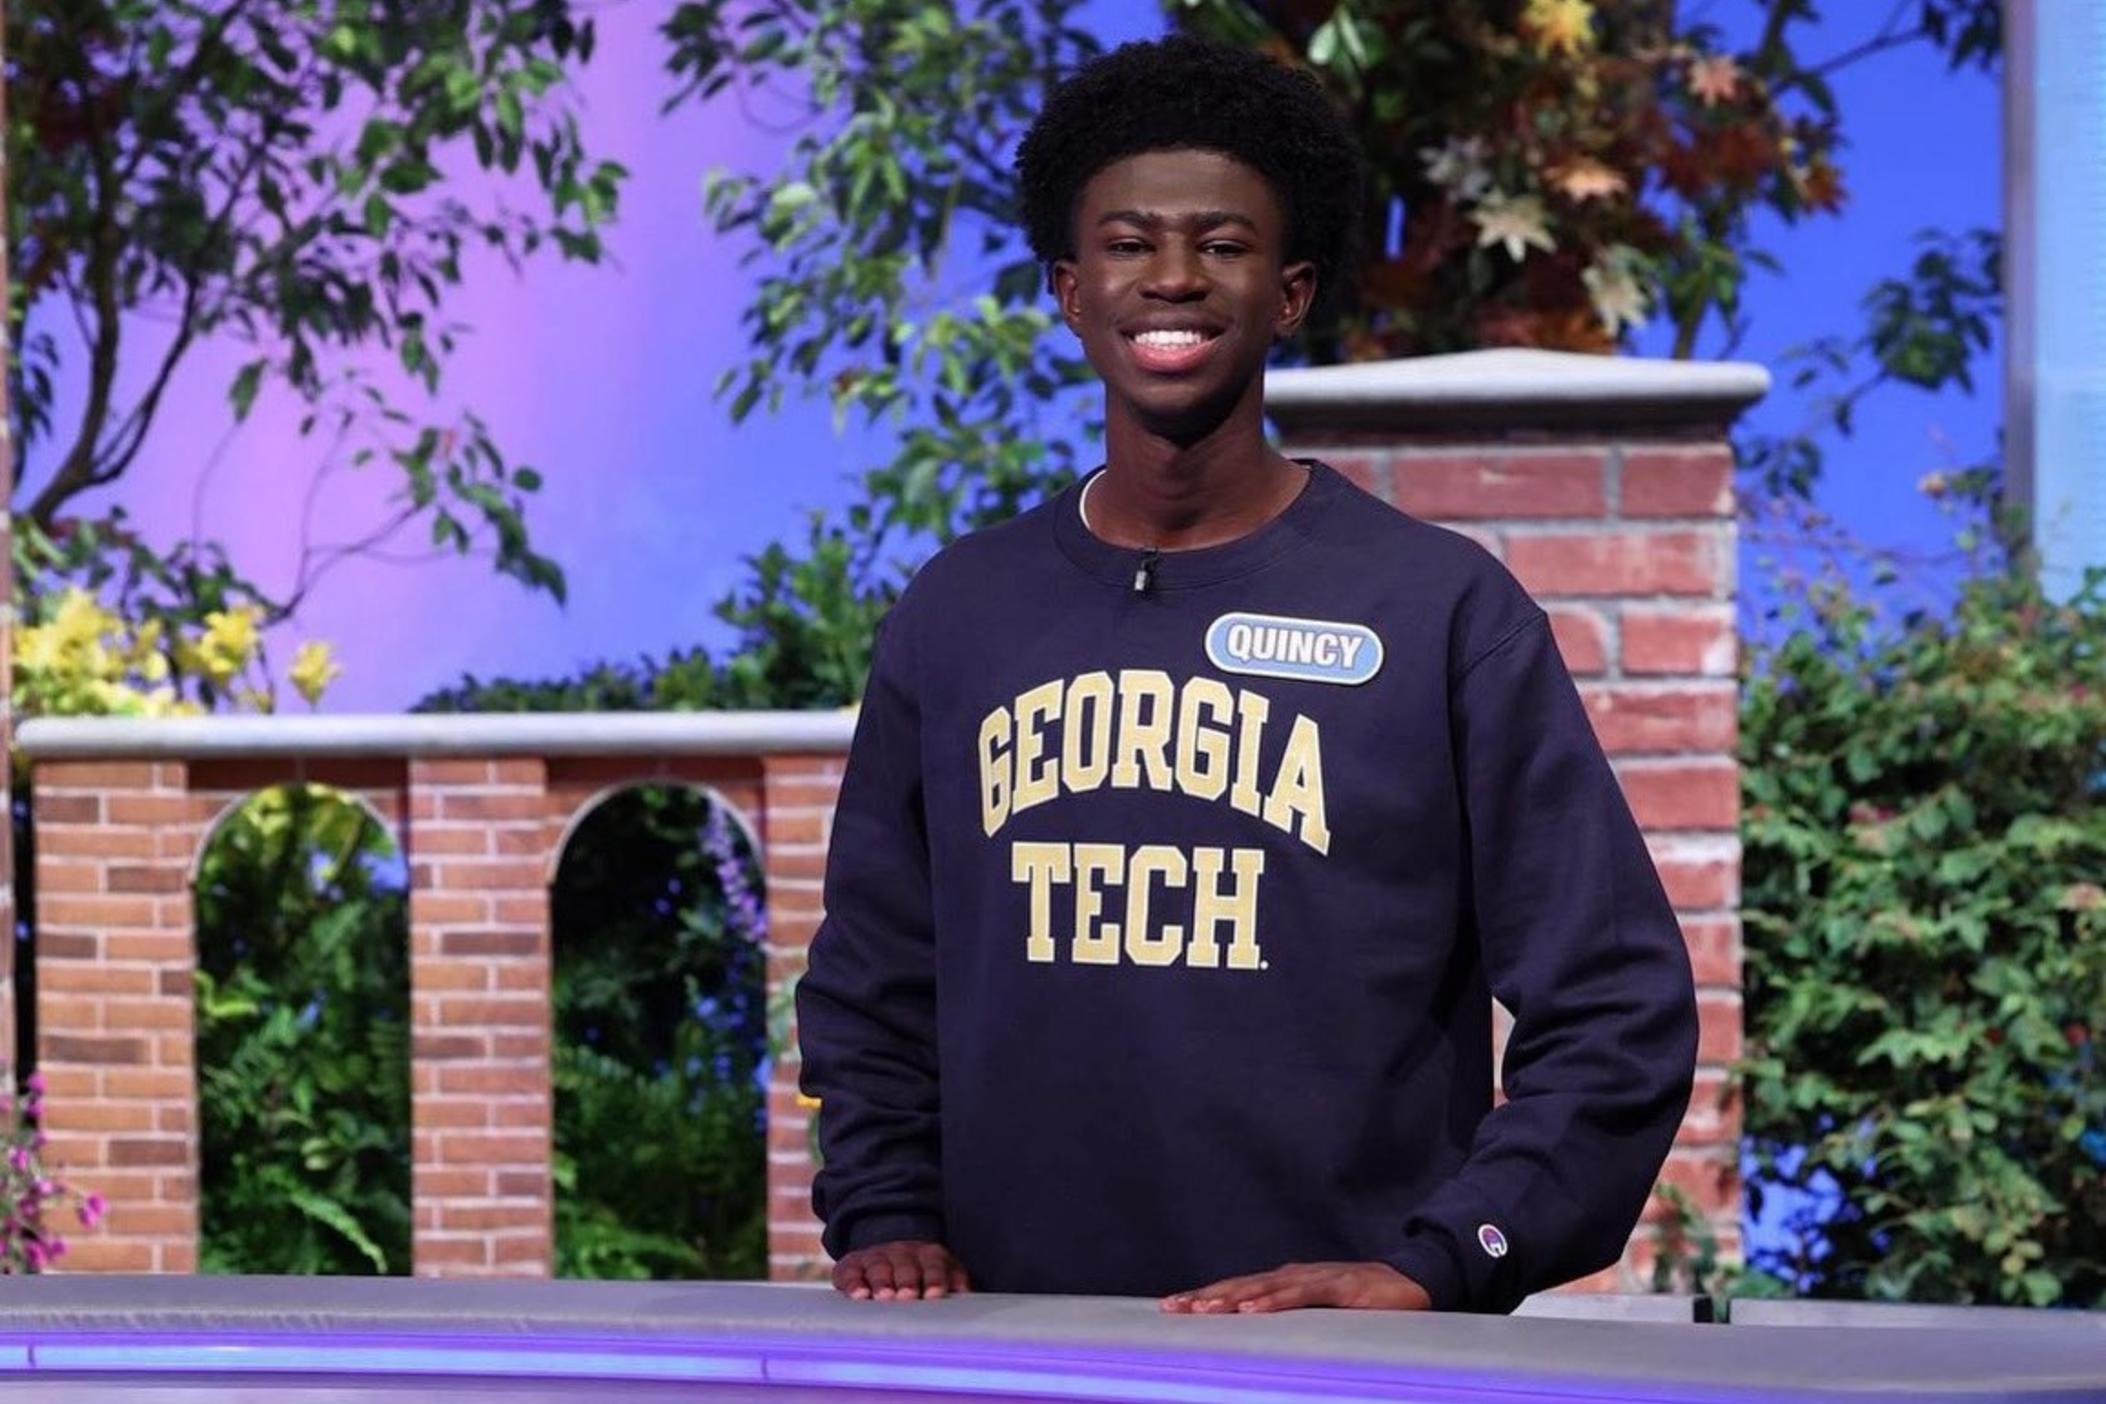 Georgia Tech student Quincy Howard won on TV's "Wheel of Fortune" during the show's 2022 College Week competition.